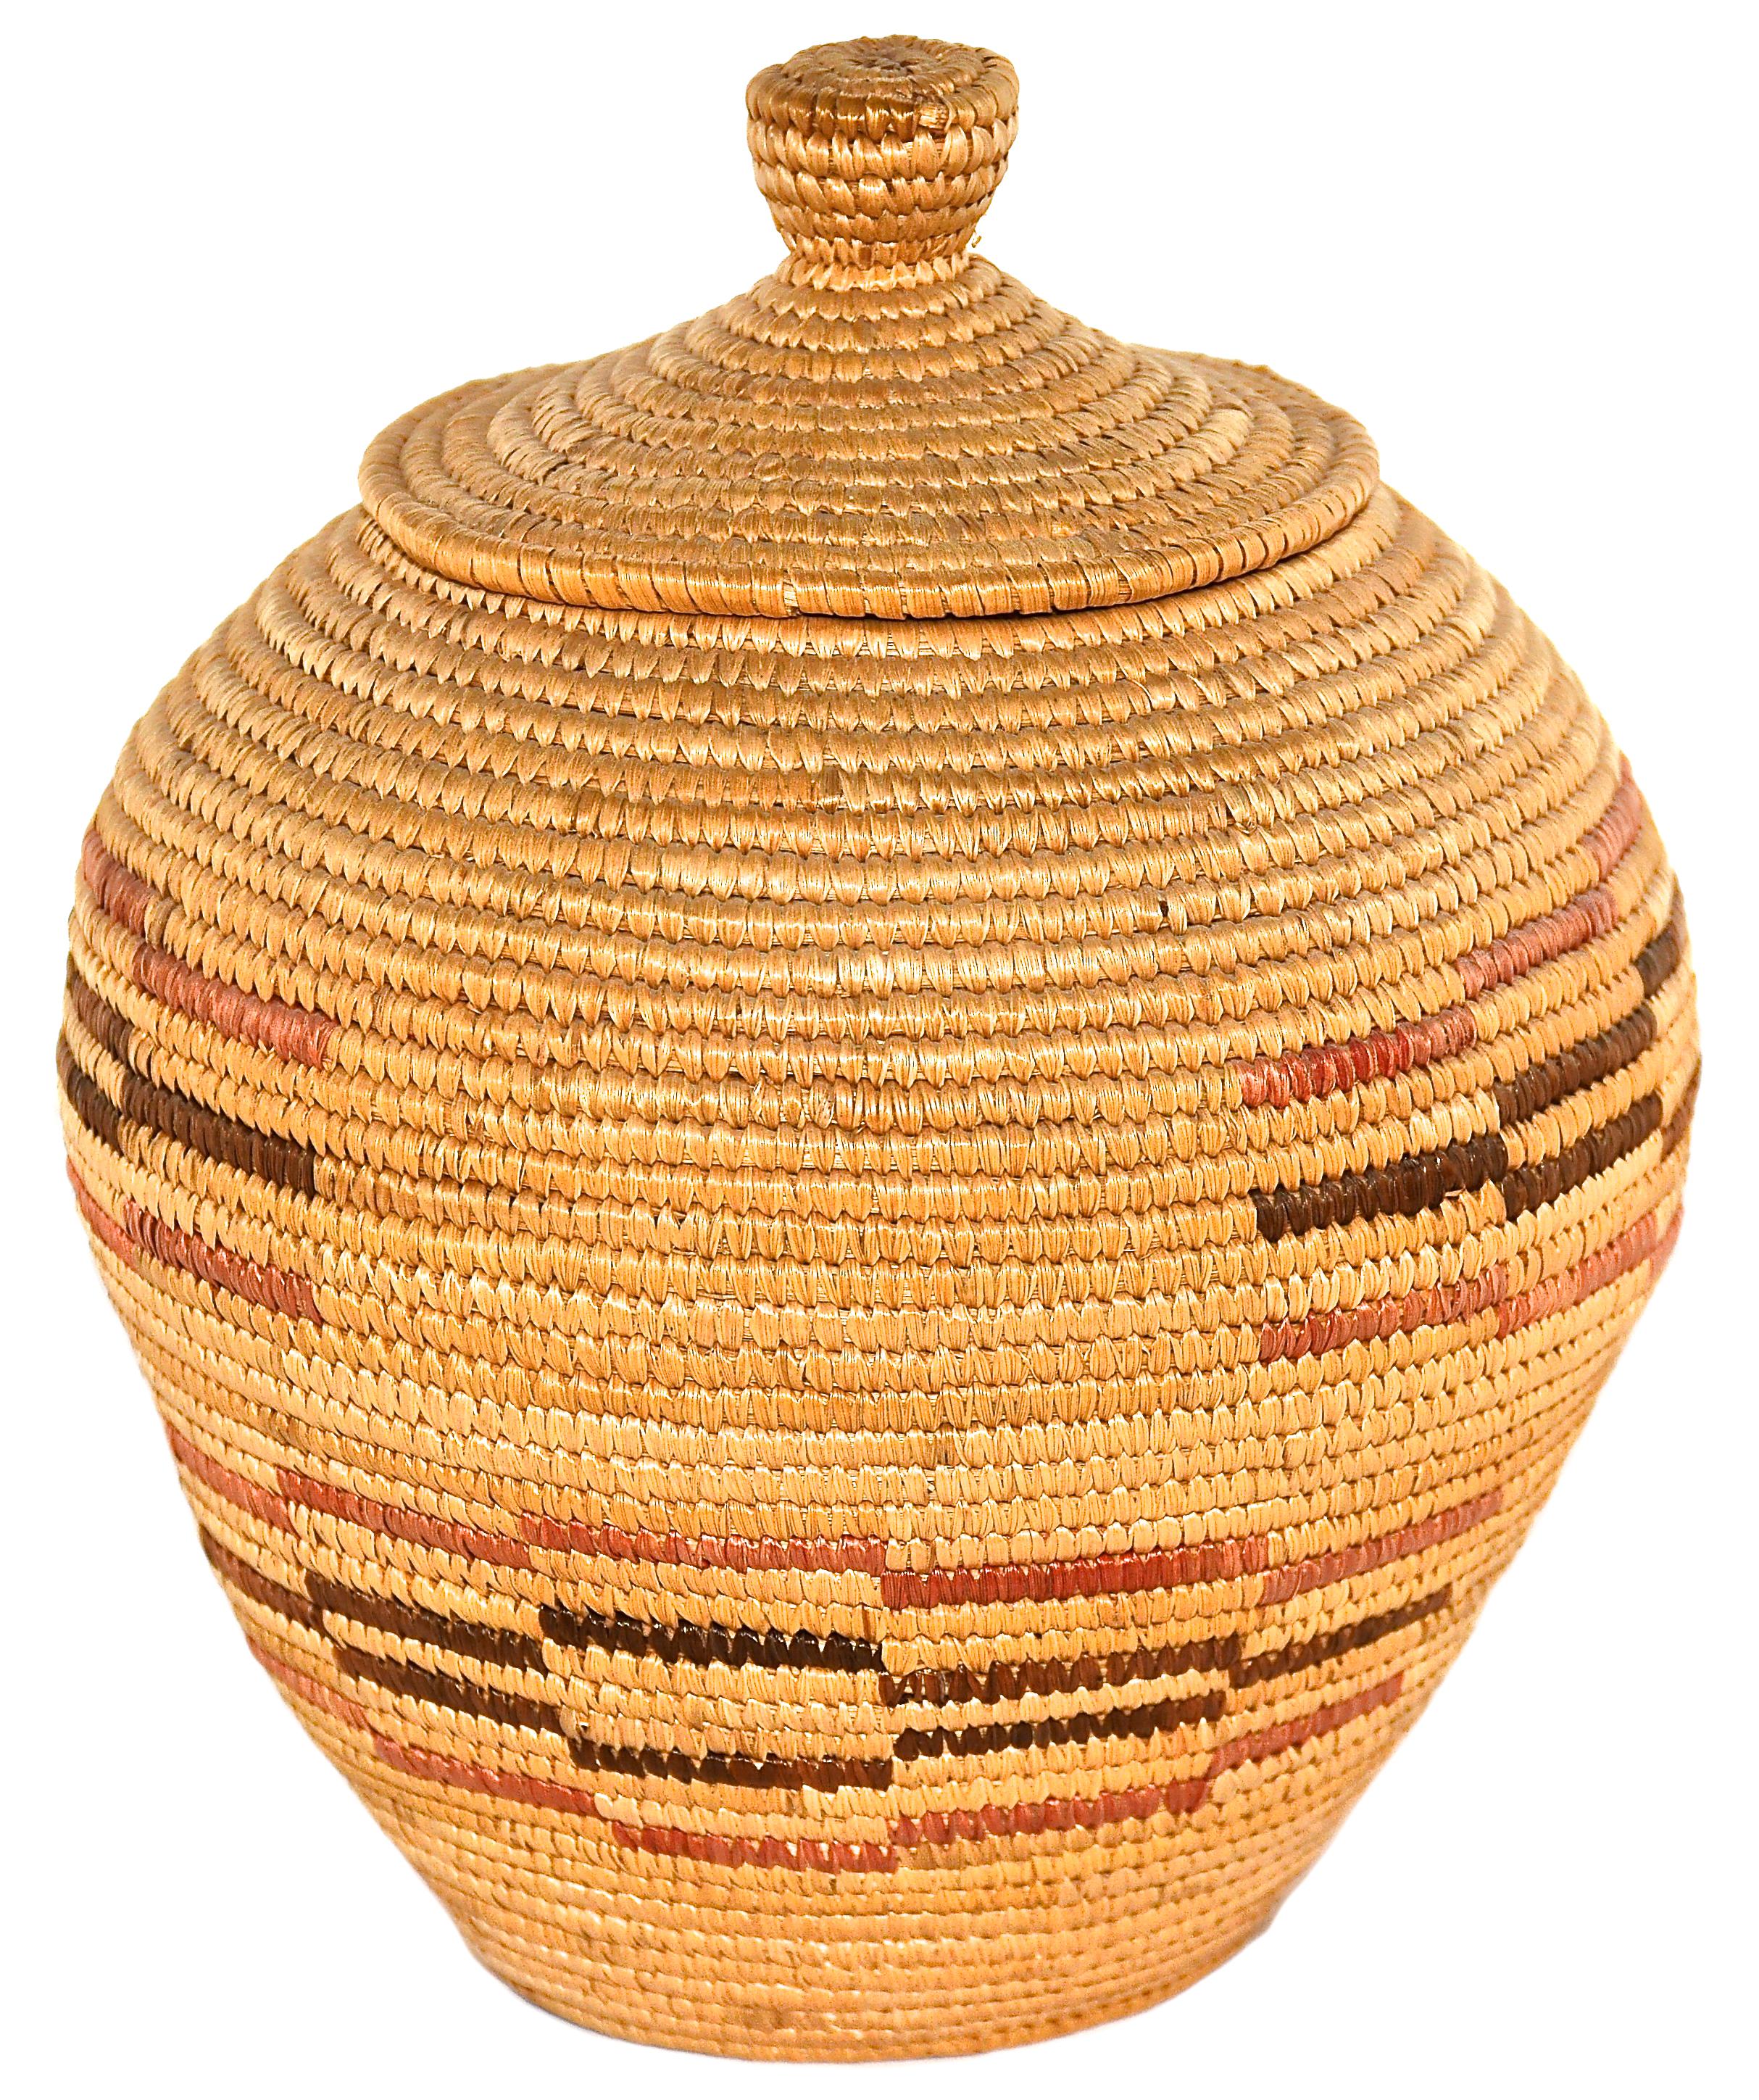 Finely Coiled Lidded grass basket
Eskimo
Hopper Bay, Alaska
Beach grass and dyed beach grass
1960s
7 inches Height x 4 inches in Diameter

This is a vintage Eskimo basket from Hopper Bay, Alaska made in the 1960s.

Far to the west along the